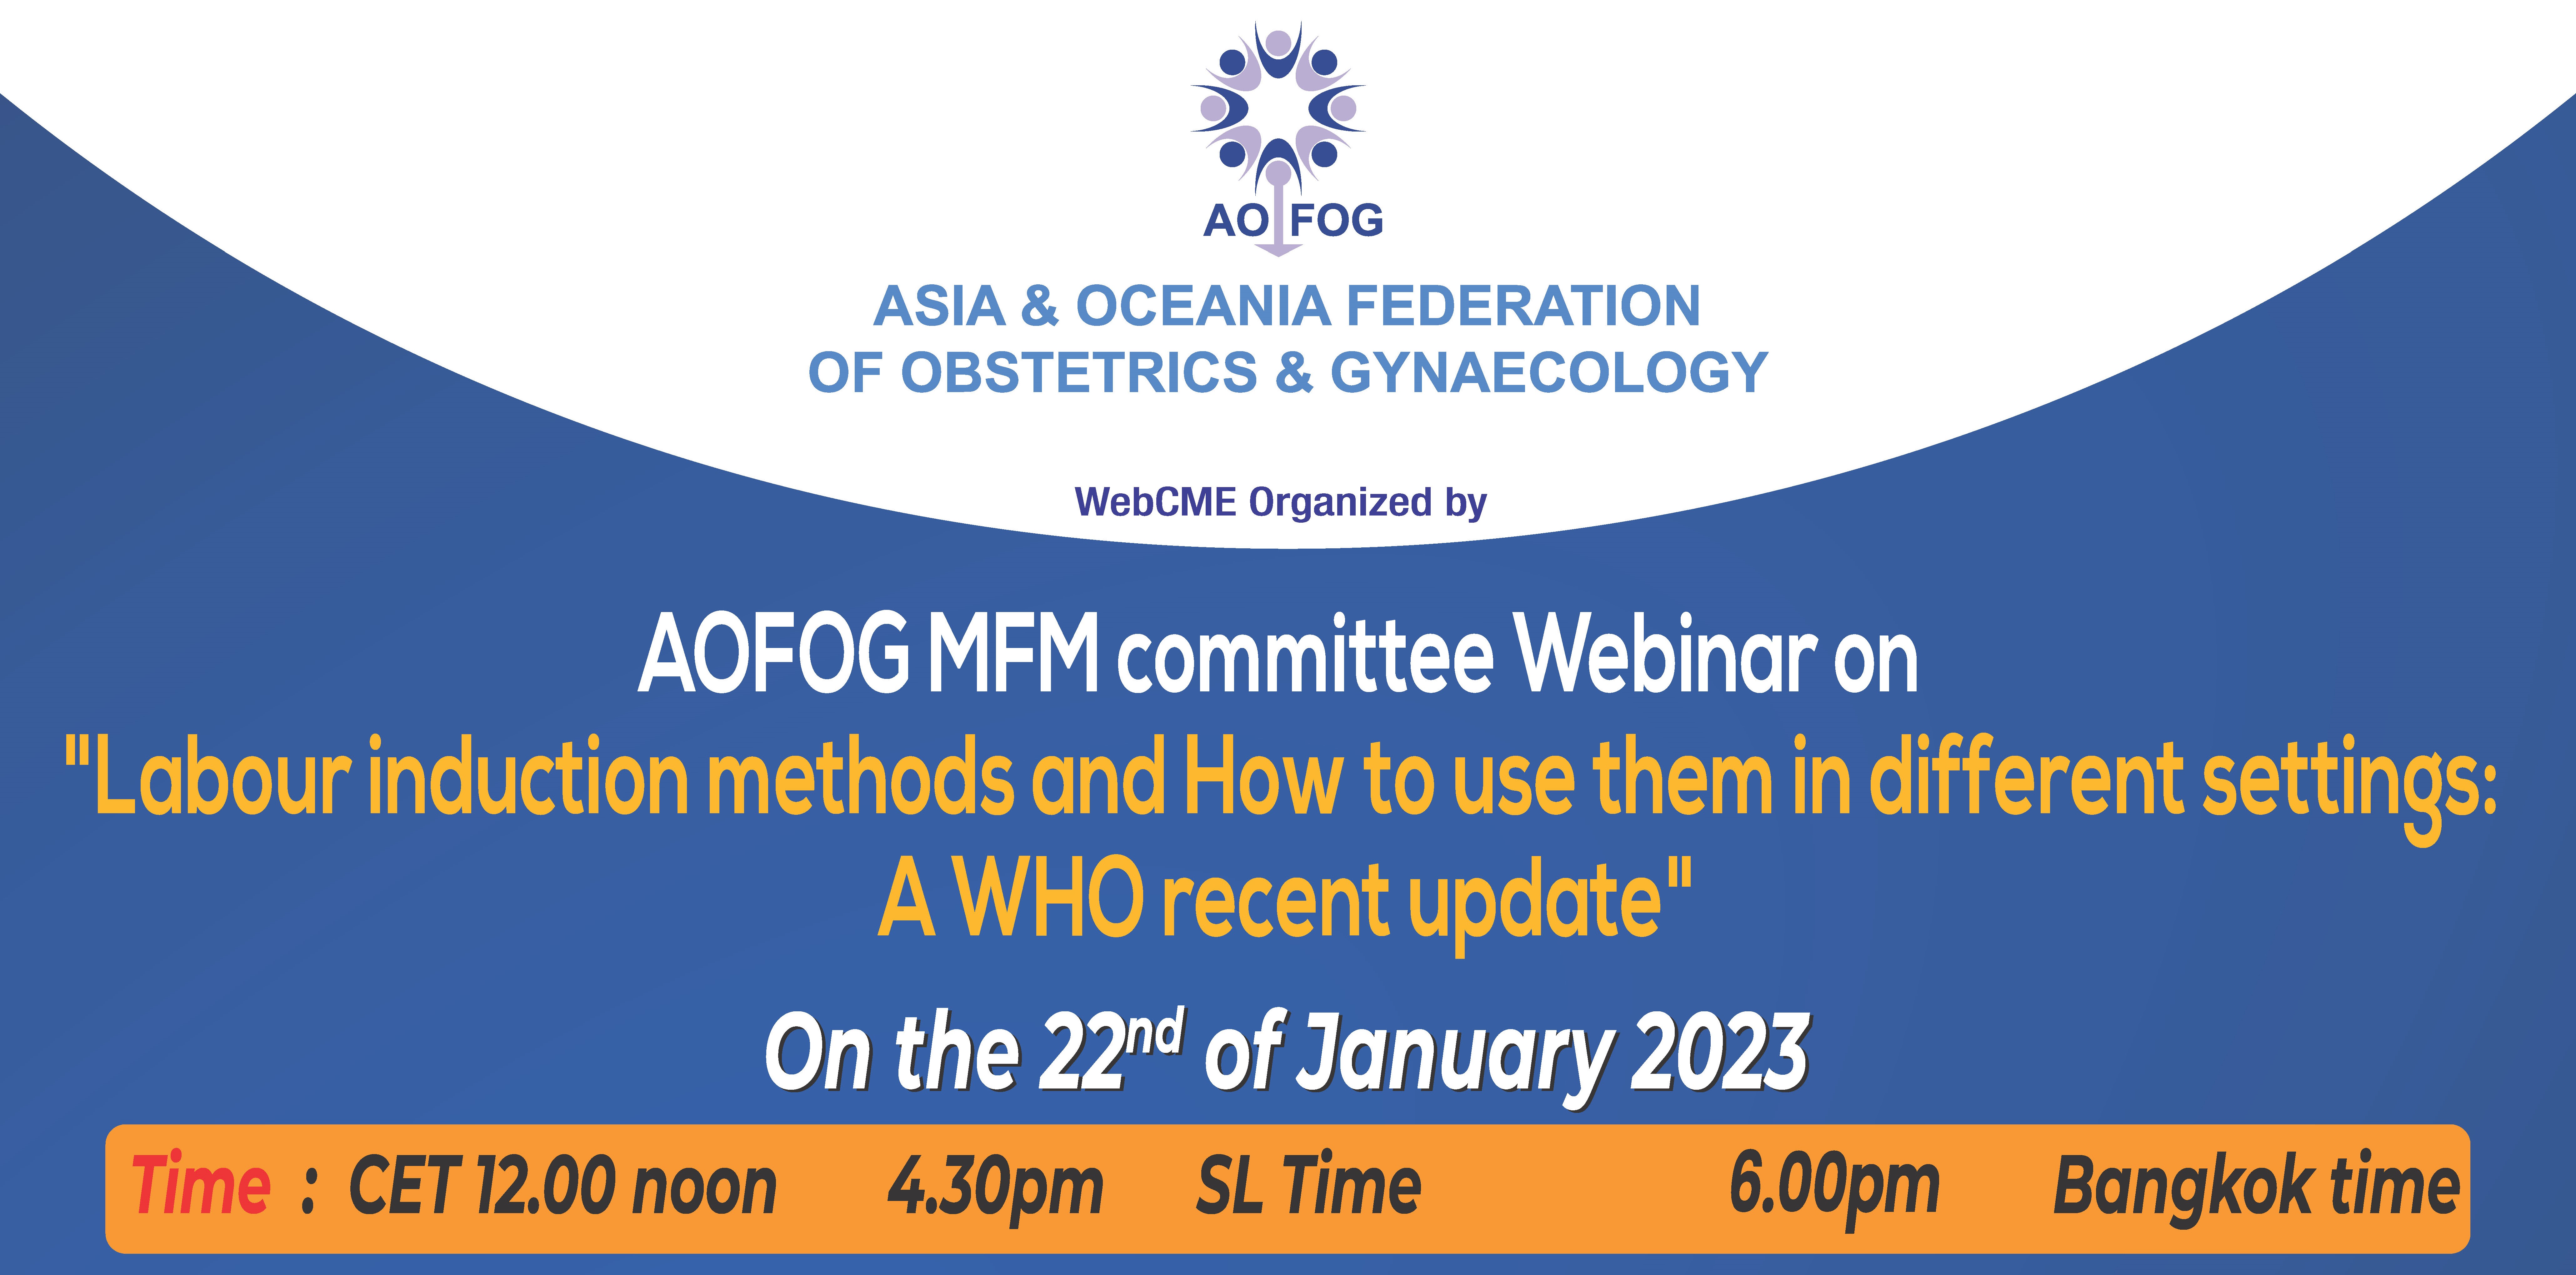 aofog-mfm-committee-webinar-on-quot-labour-induction-methods-and-how-to-use-them-in-different-settings-a-who-recent-update-quot-